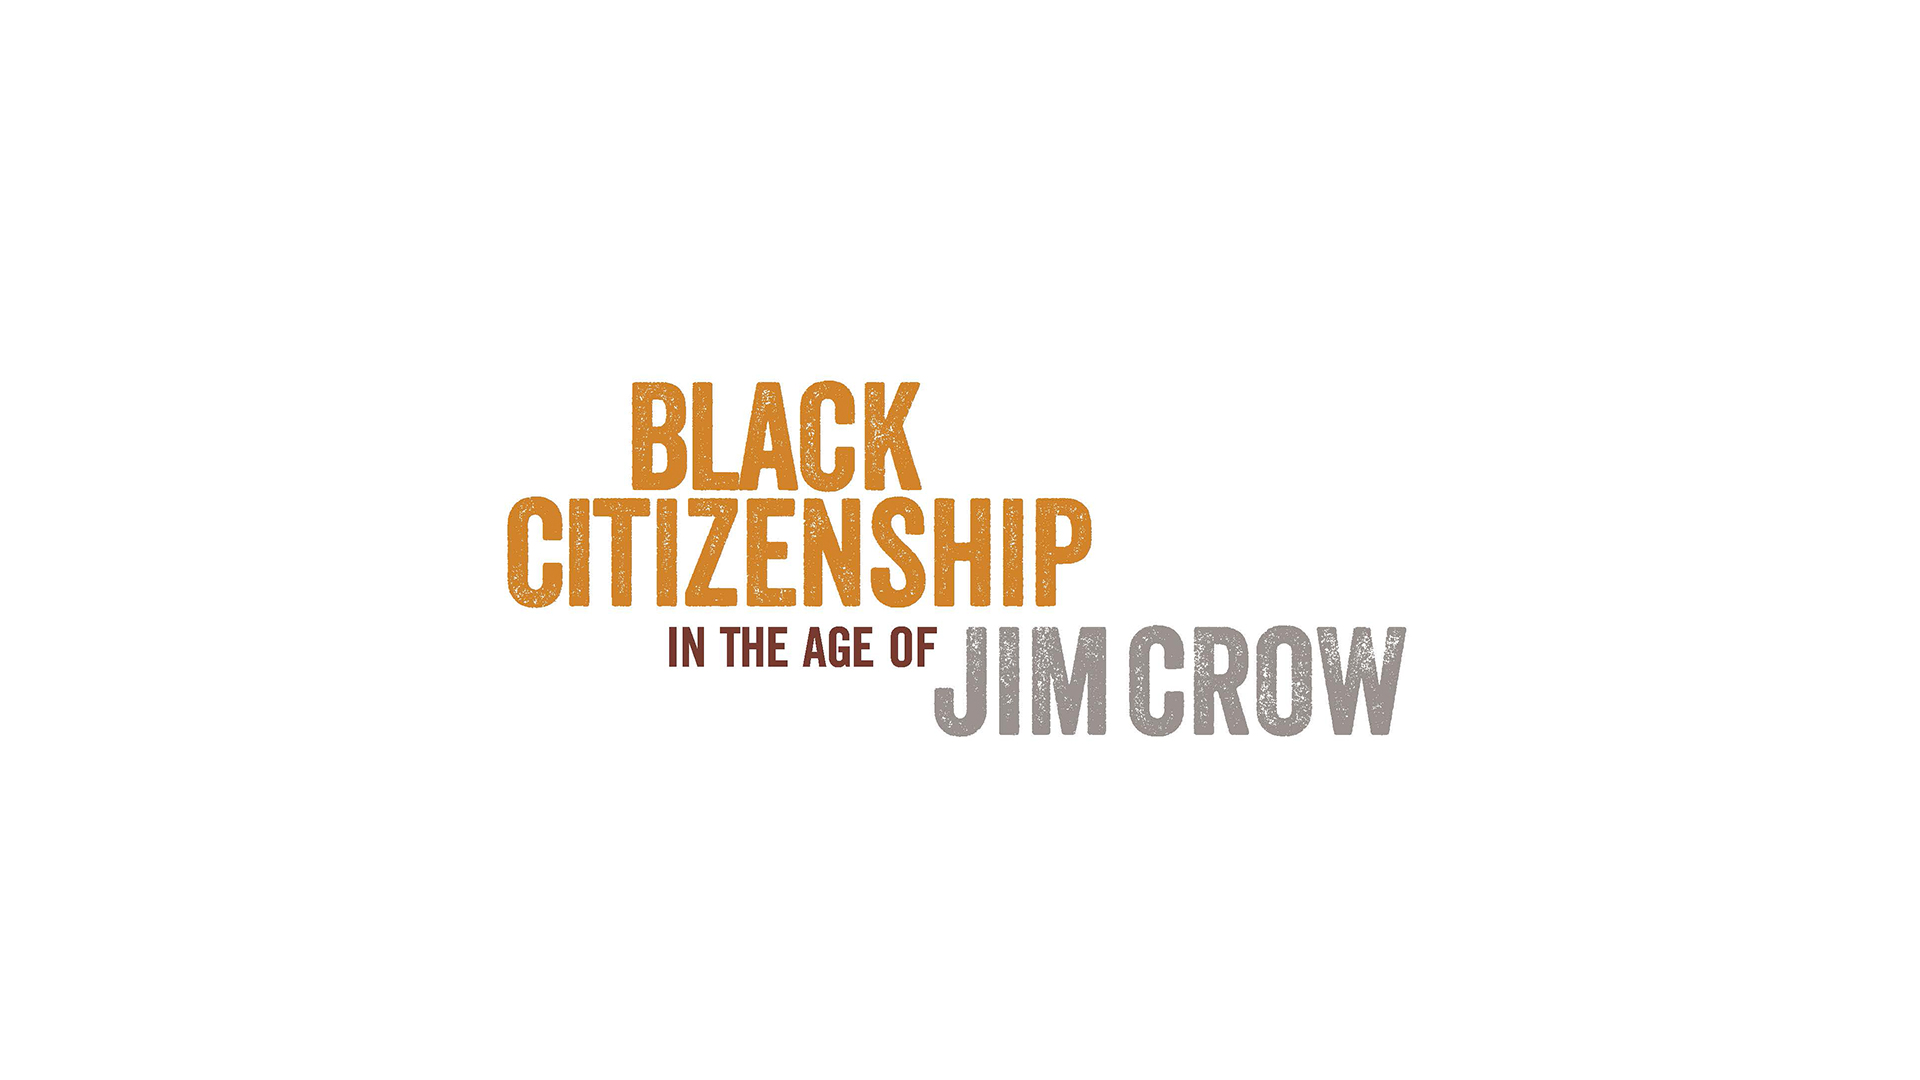 Exhibit details chronology of Jim Crow laws in US overview image